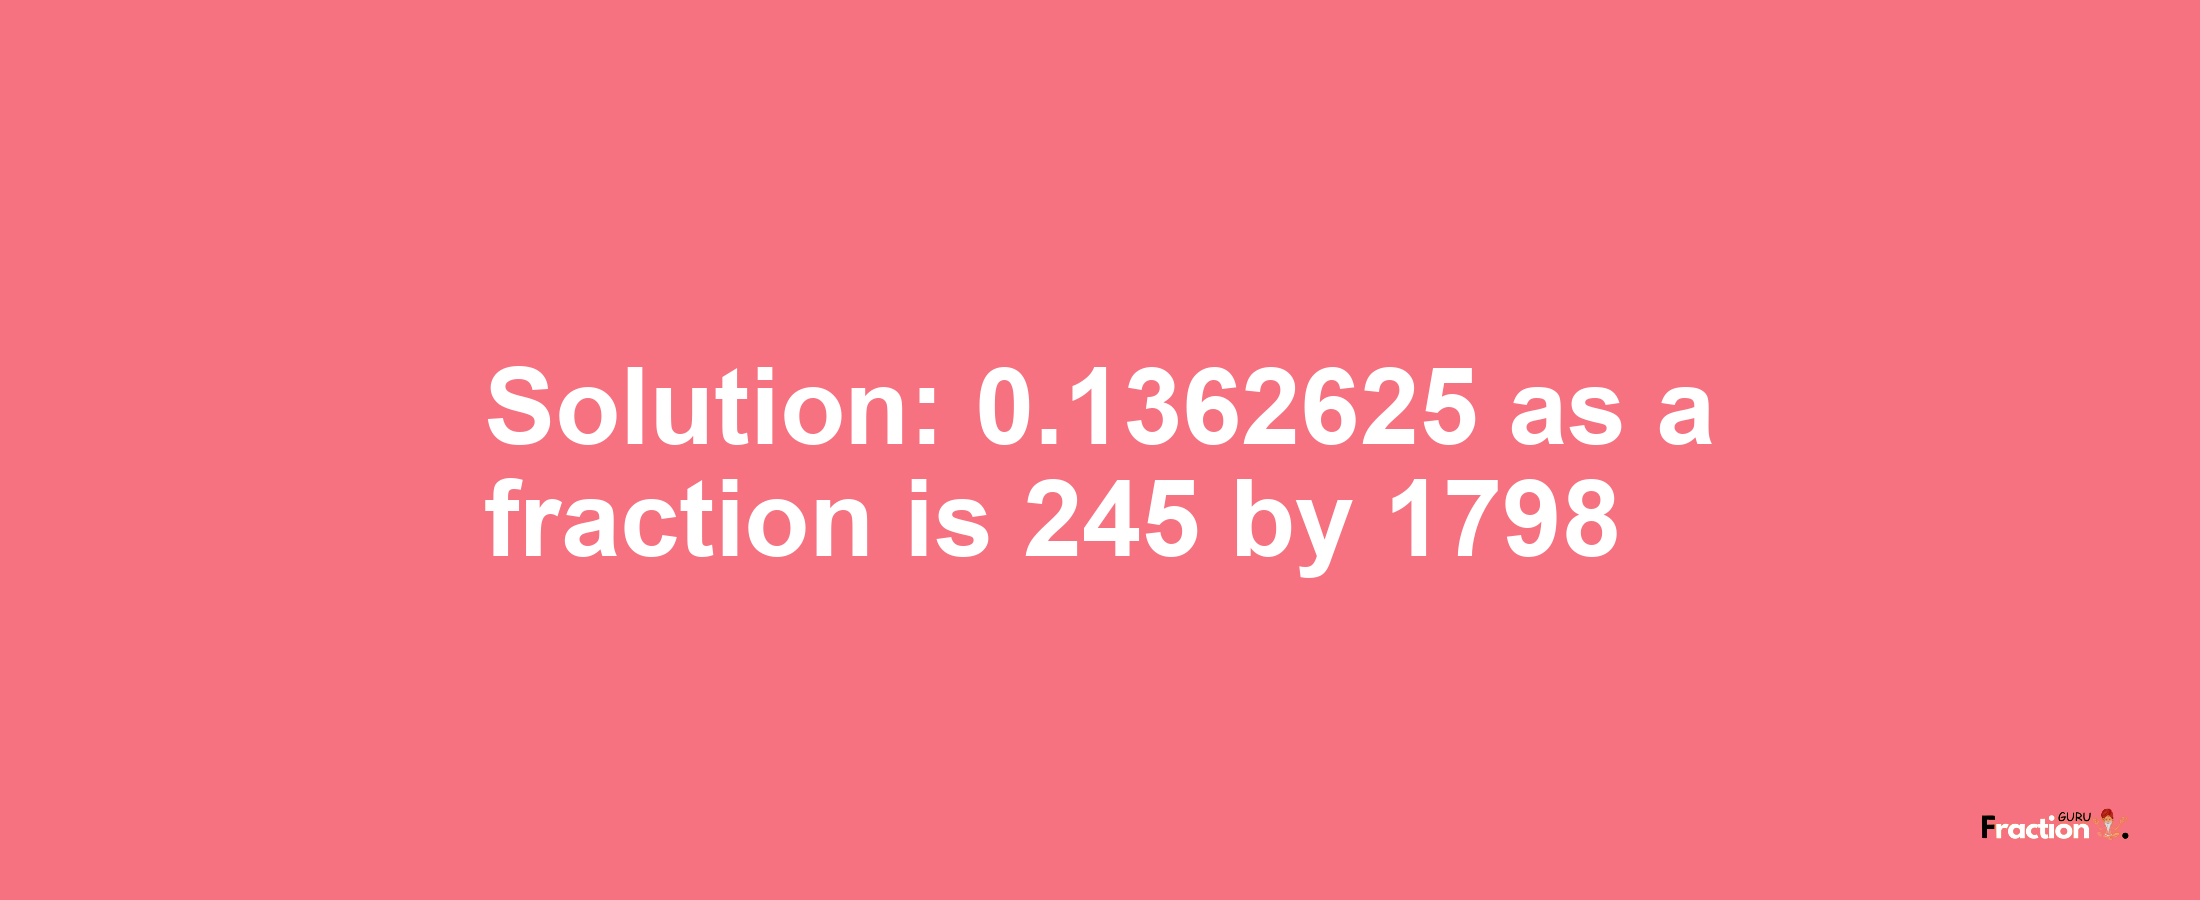 Solution:0.1362625 as a fraction is 245/1798